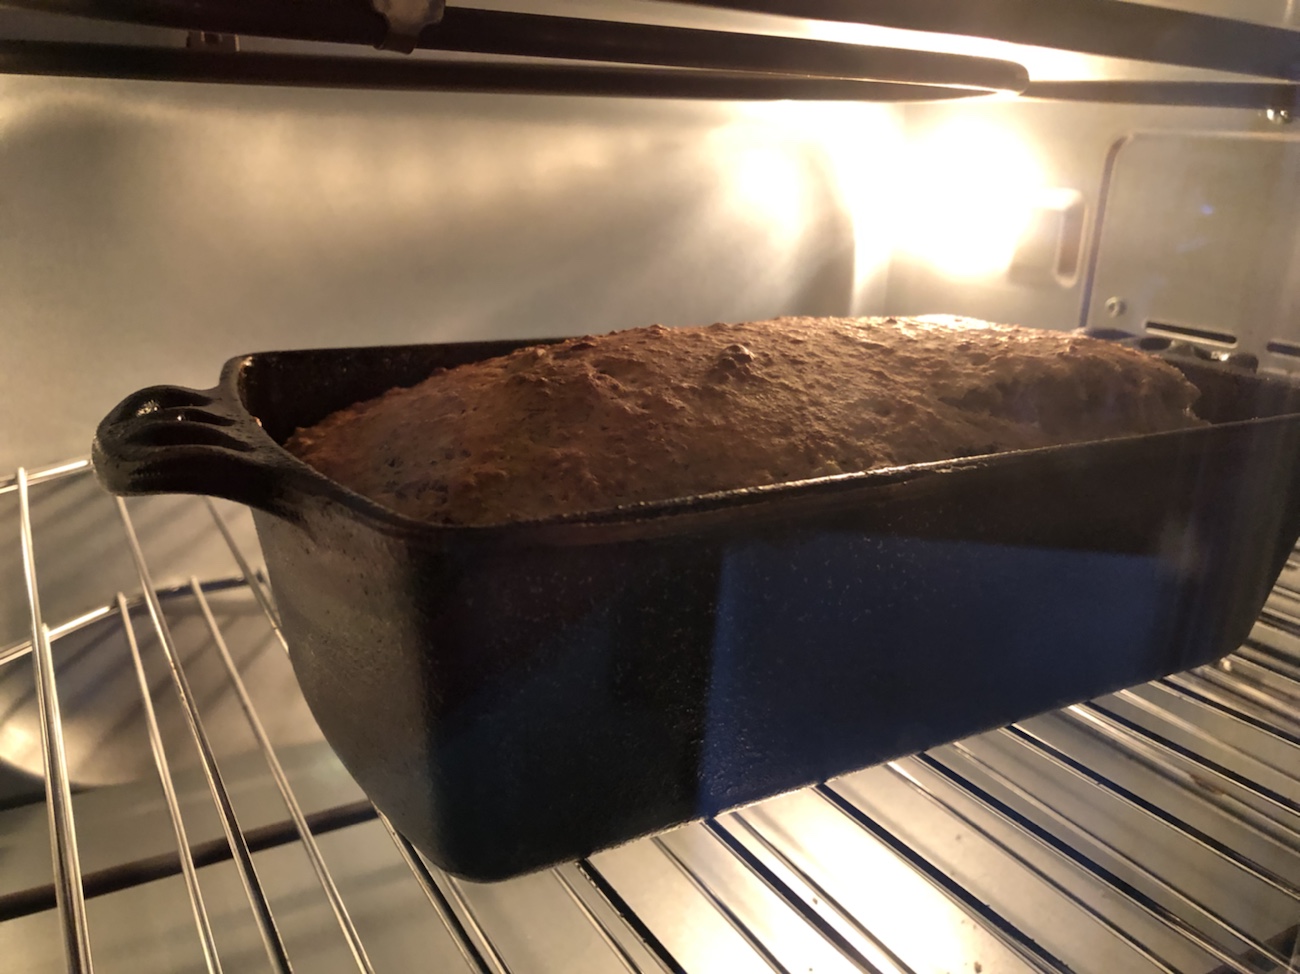 Cast Iron Chronicles: Camp Chef Loaf Pan